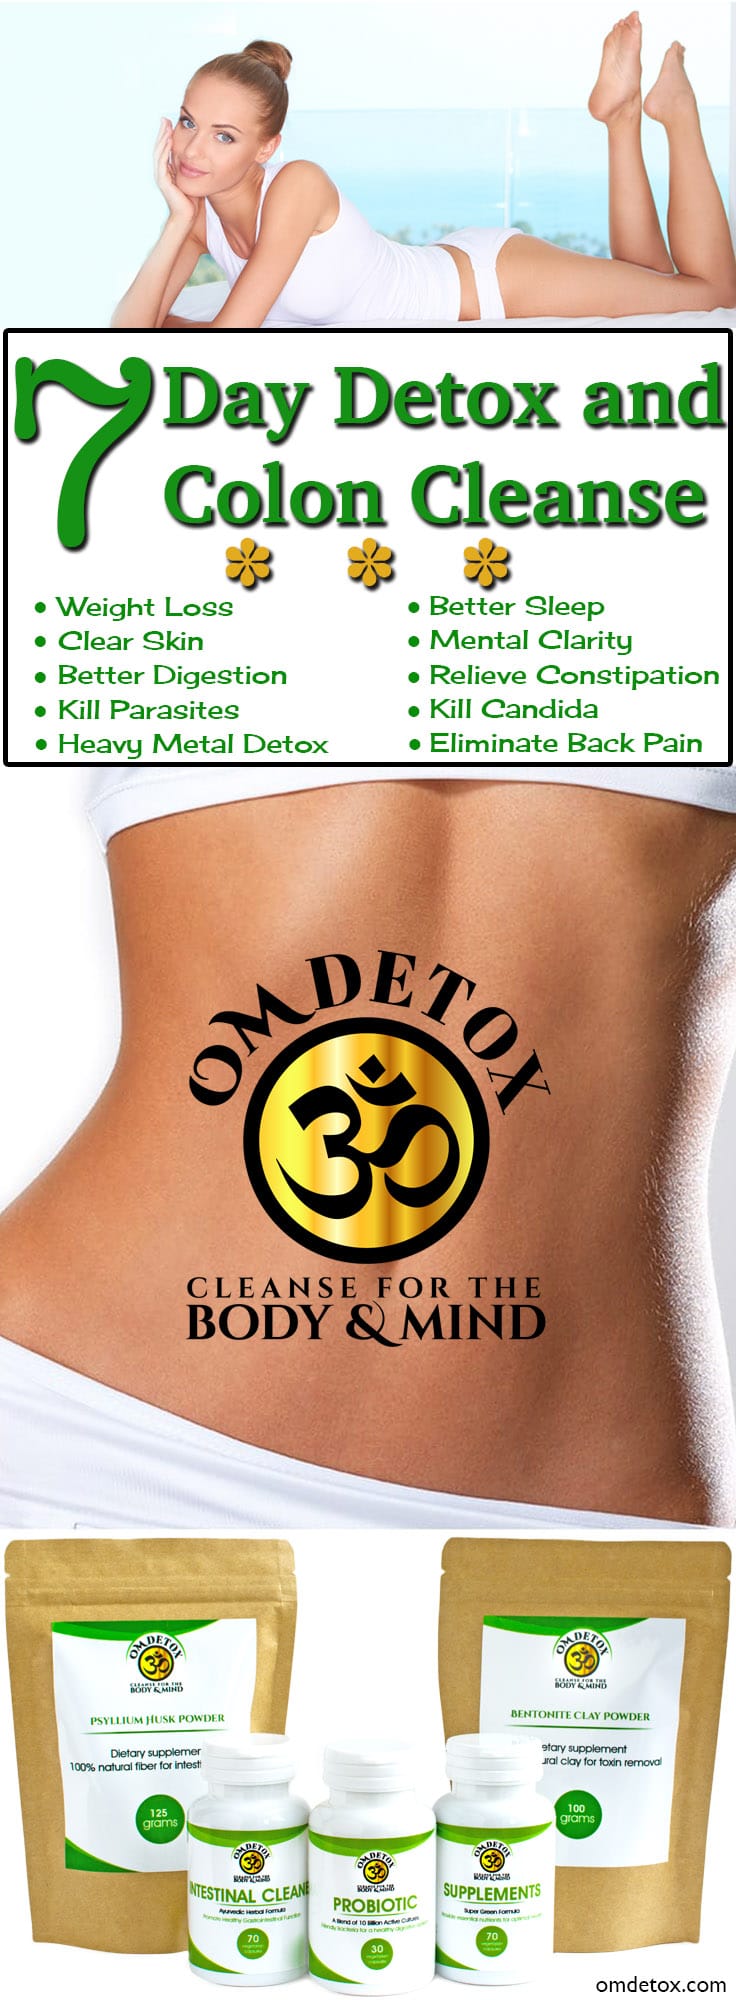 Om Detox 7 Day Detox and Colon Cleanse, For easy weight loss and parasite treatment